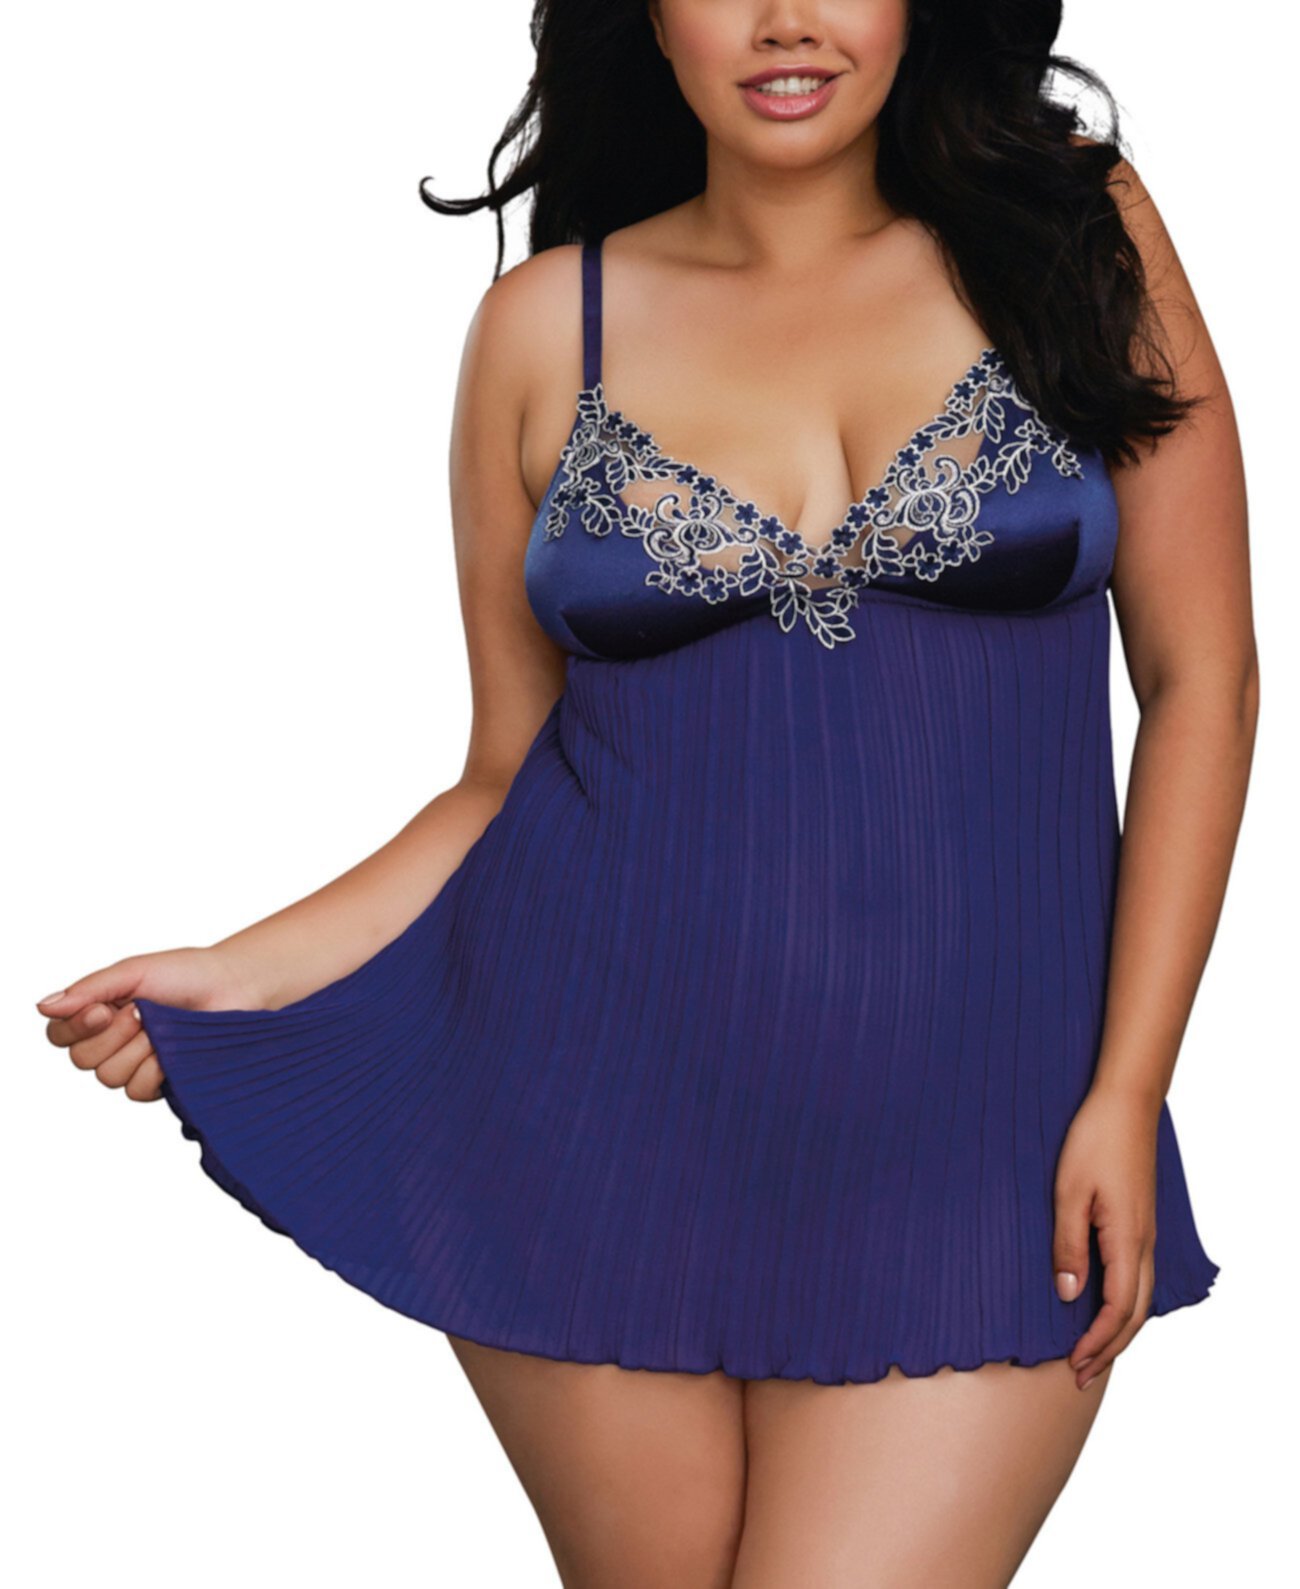 Plus Size Babydoll With Floral Embroidery Dreamgirl